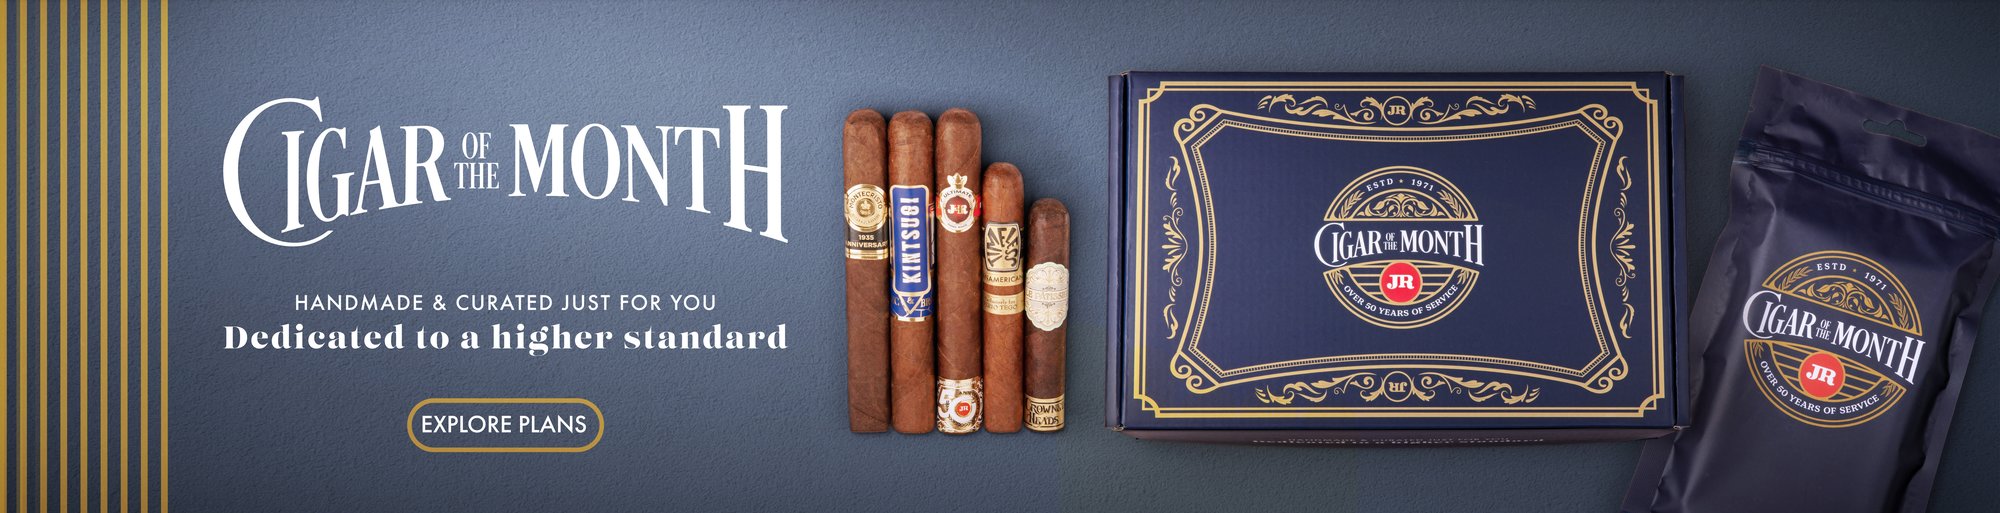 image of cigar of the month box and pack